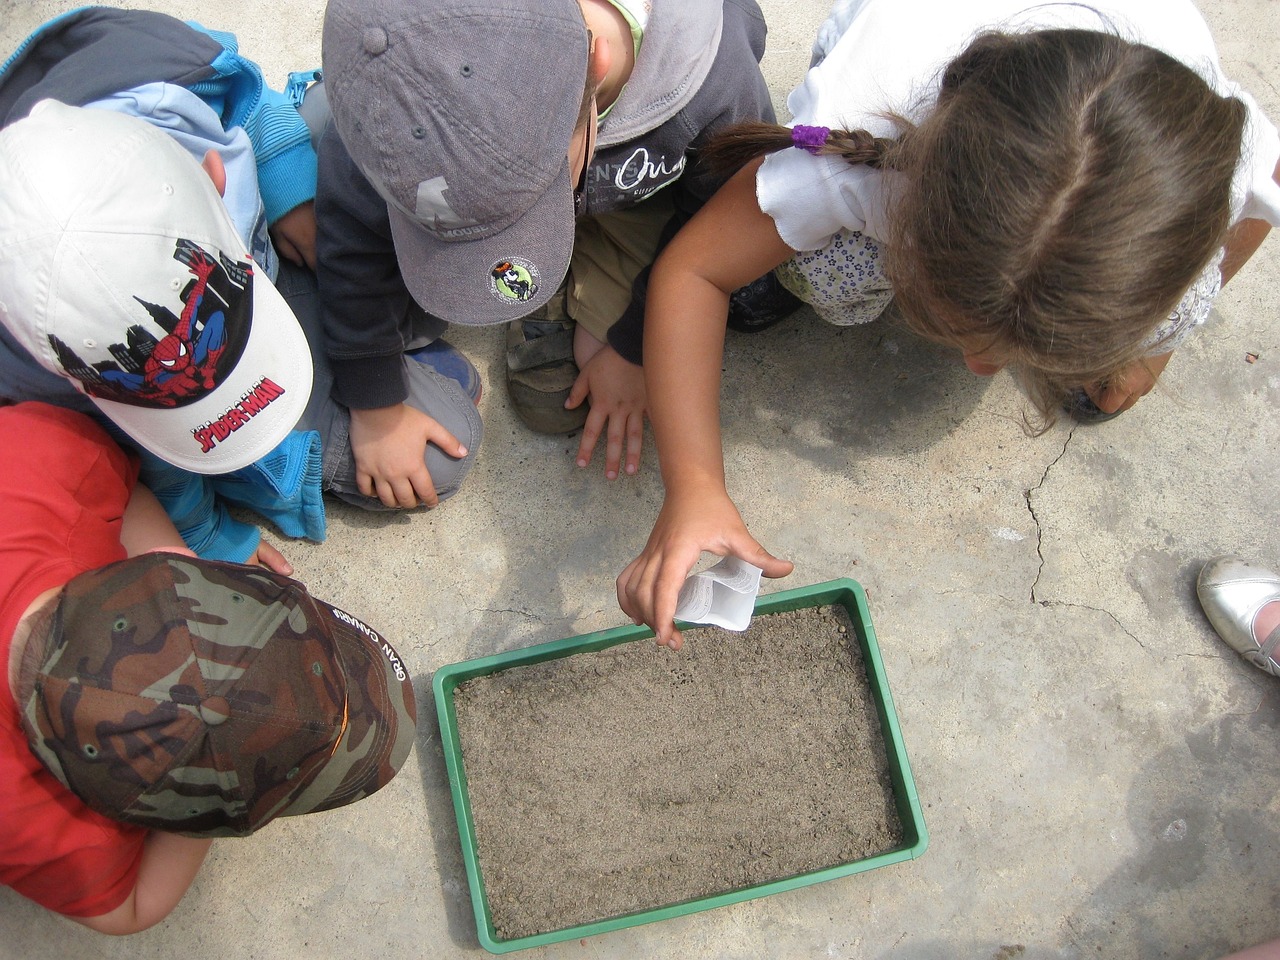 What Are The Benefits Of Environmental Education?